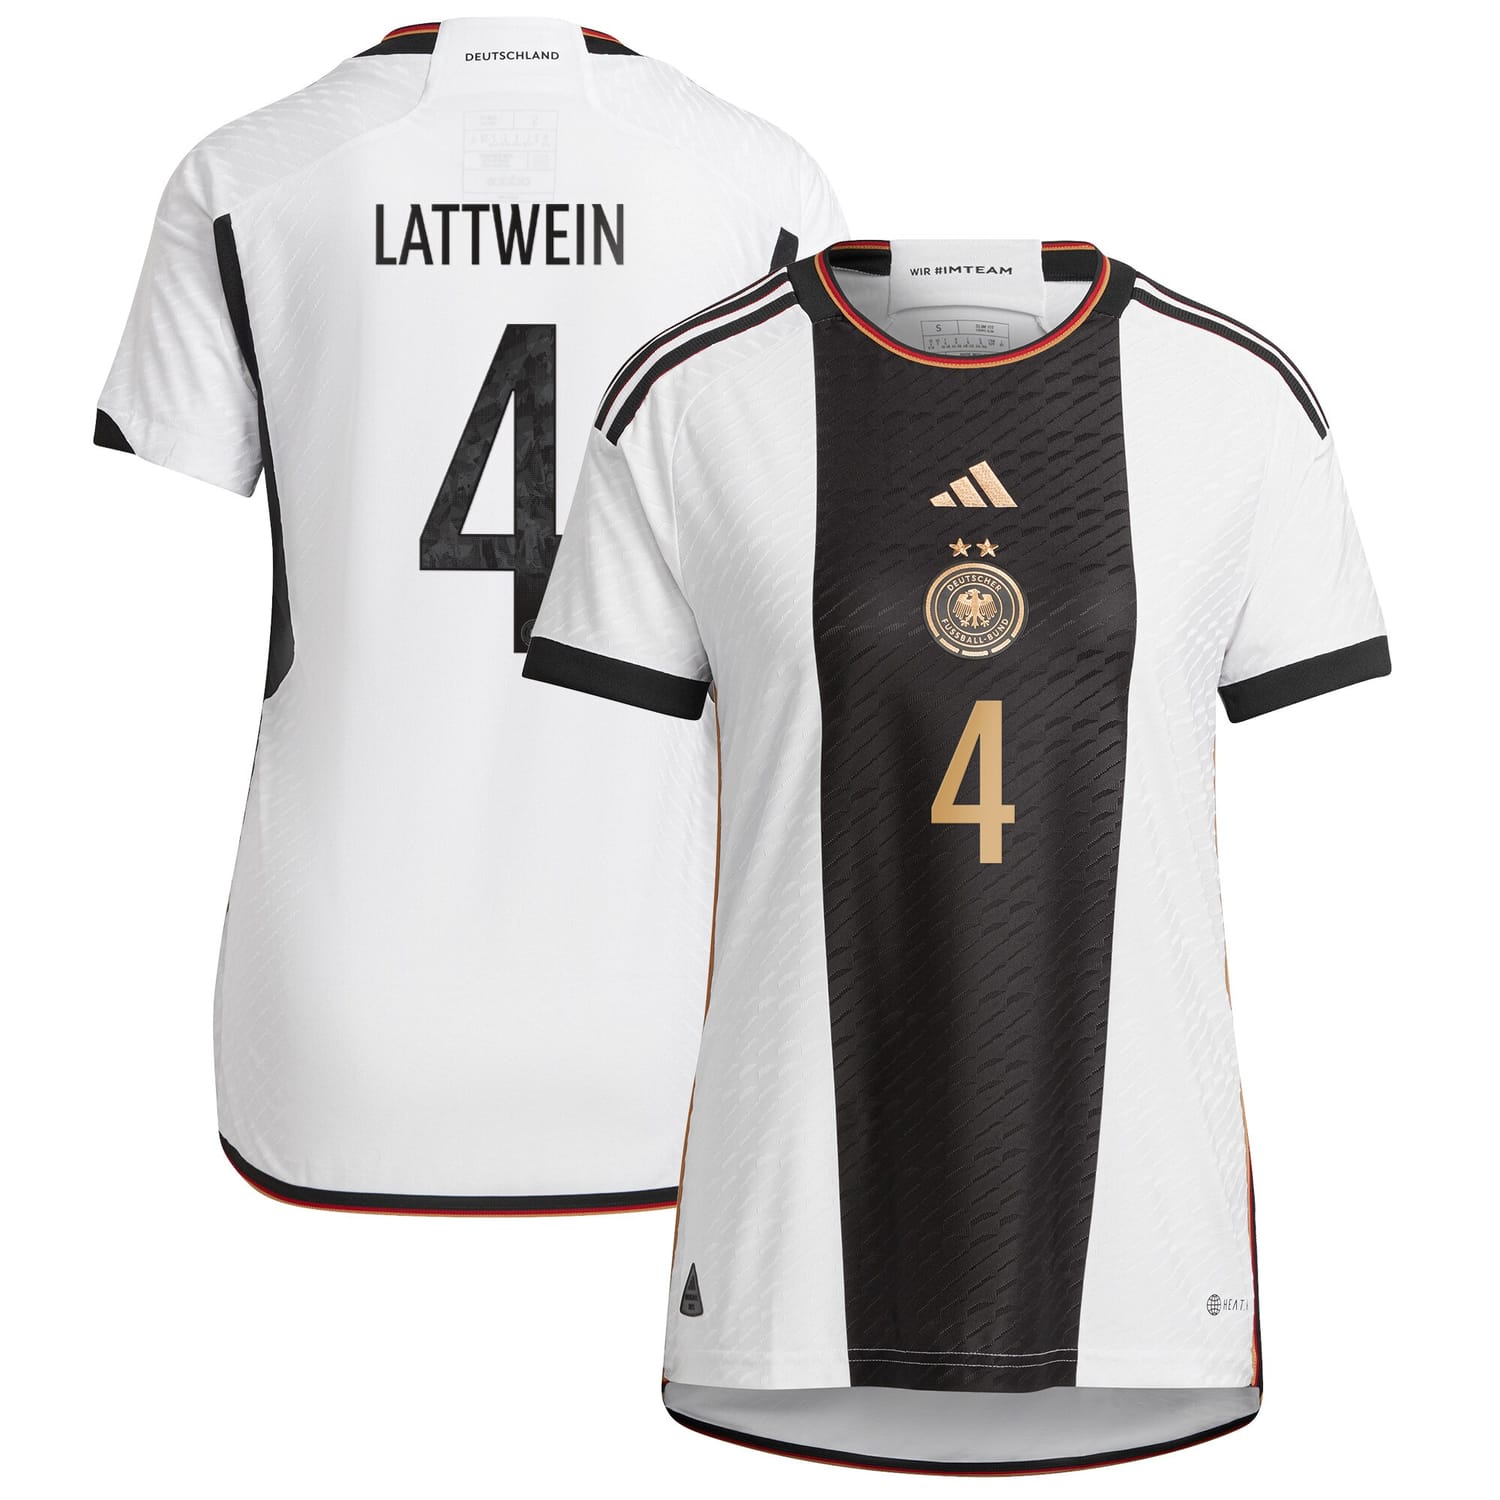 Germany National Team Home Authentic Jersey Shirt player Lena Lattwein 4 printing for Women